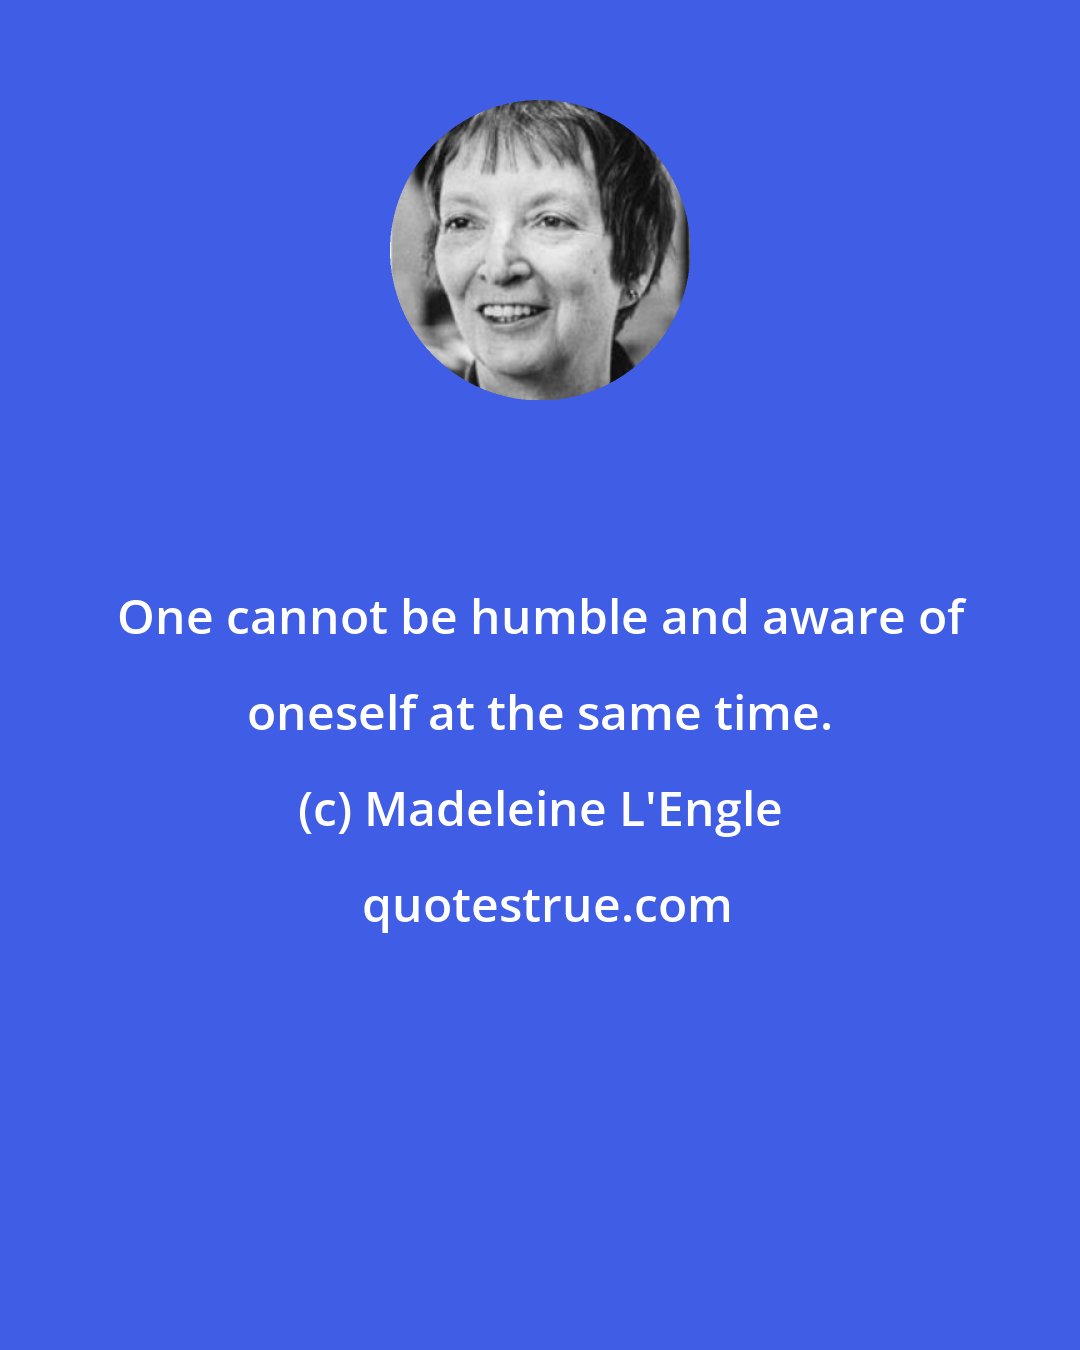 Madeleine L'Engle: One cannot be humble and aware of oneself at the same time.